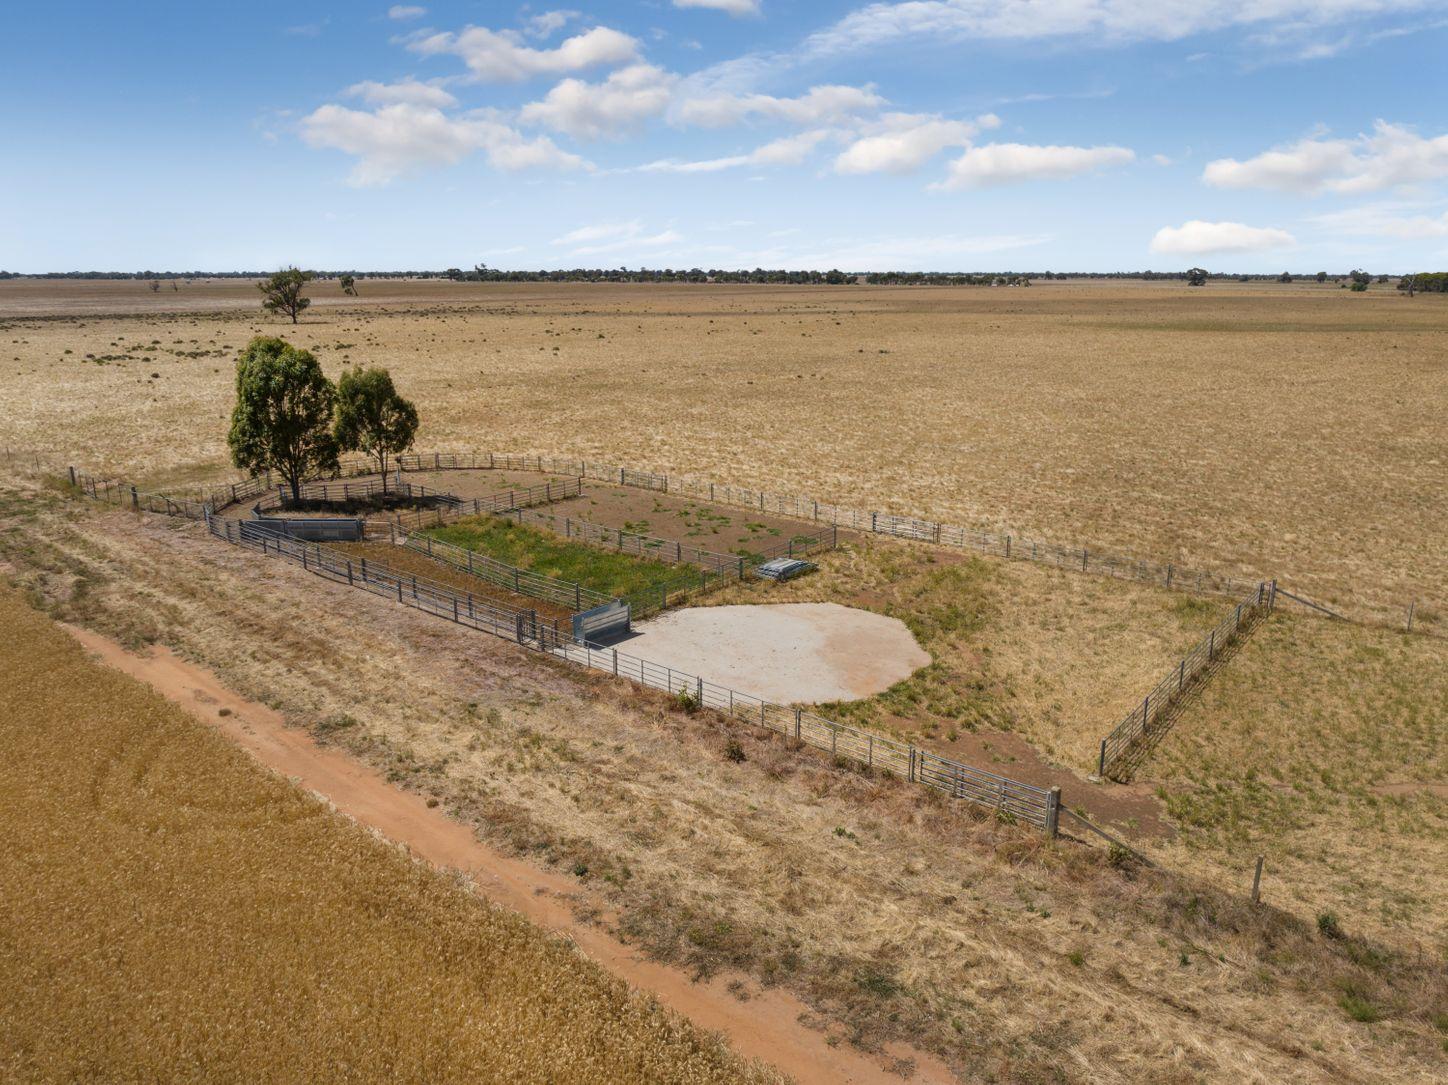 Rural Property For Sale VIC